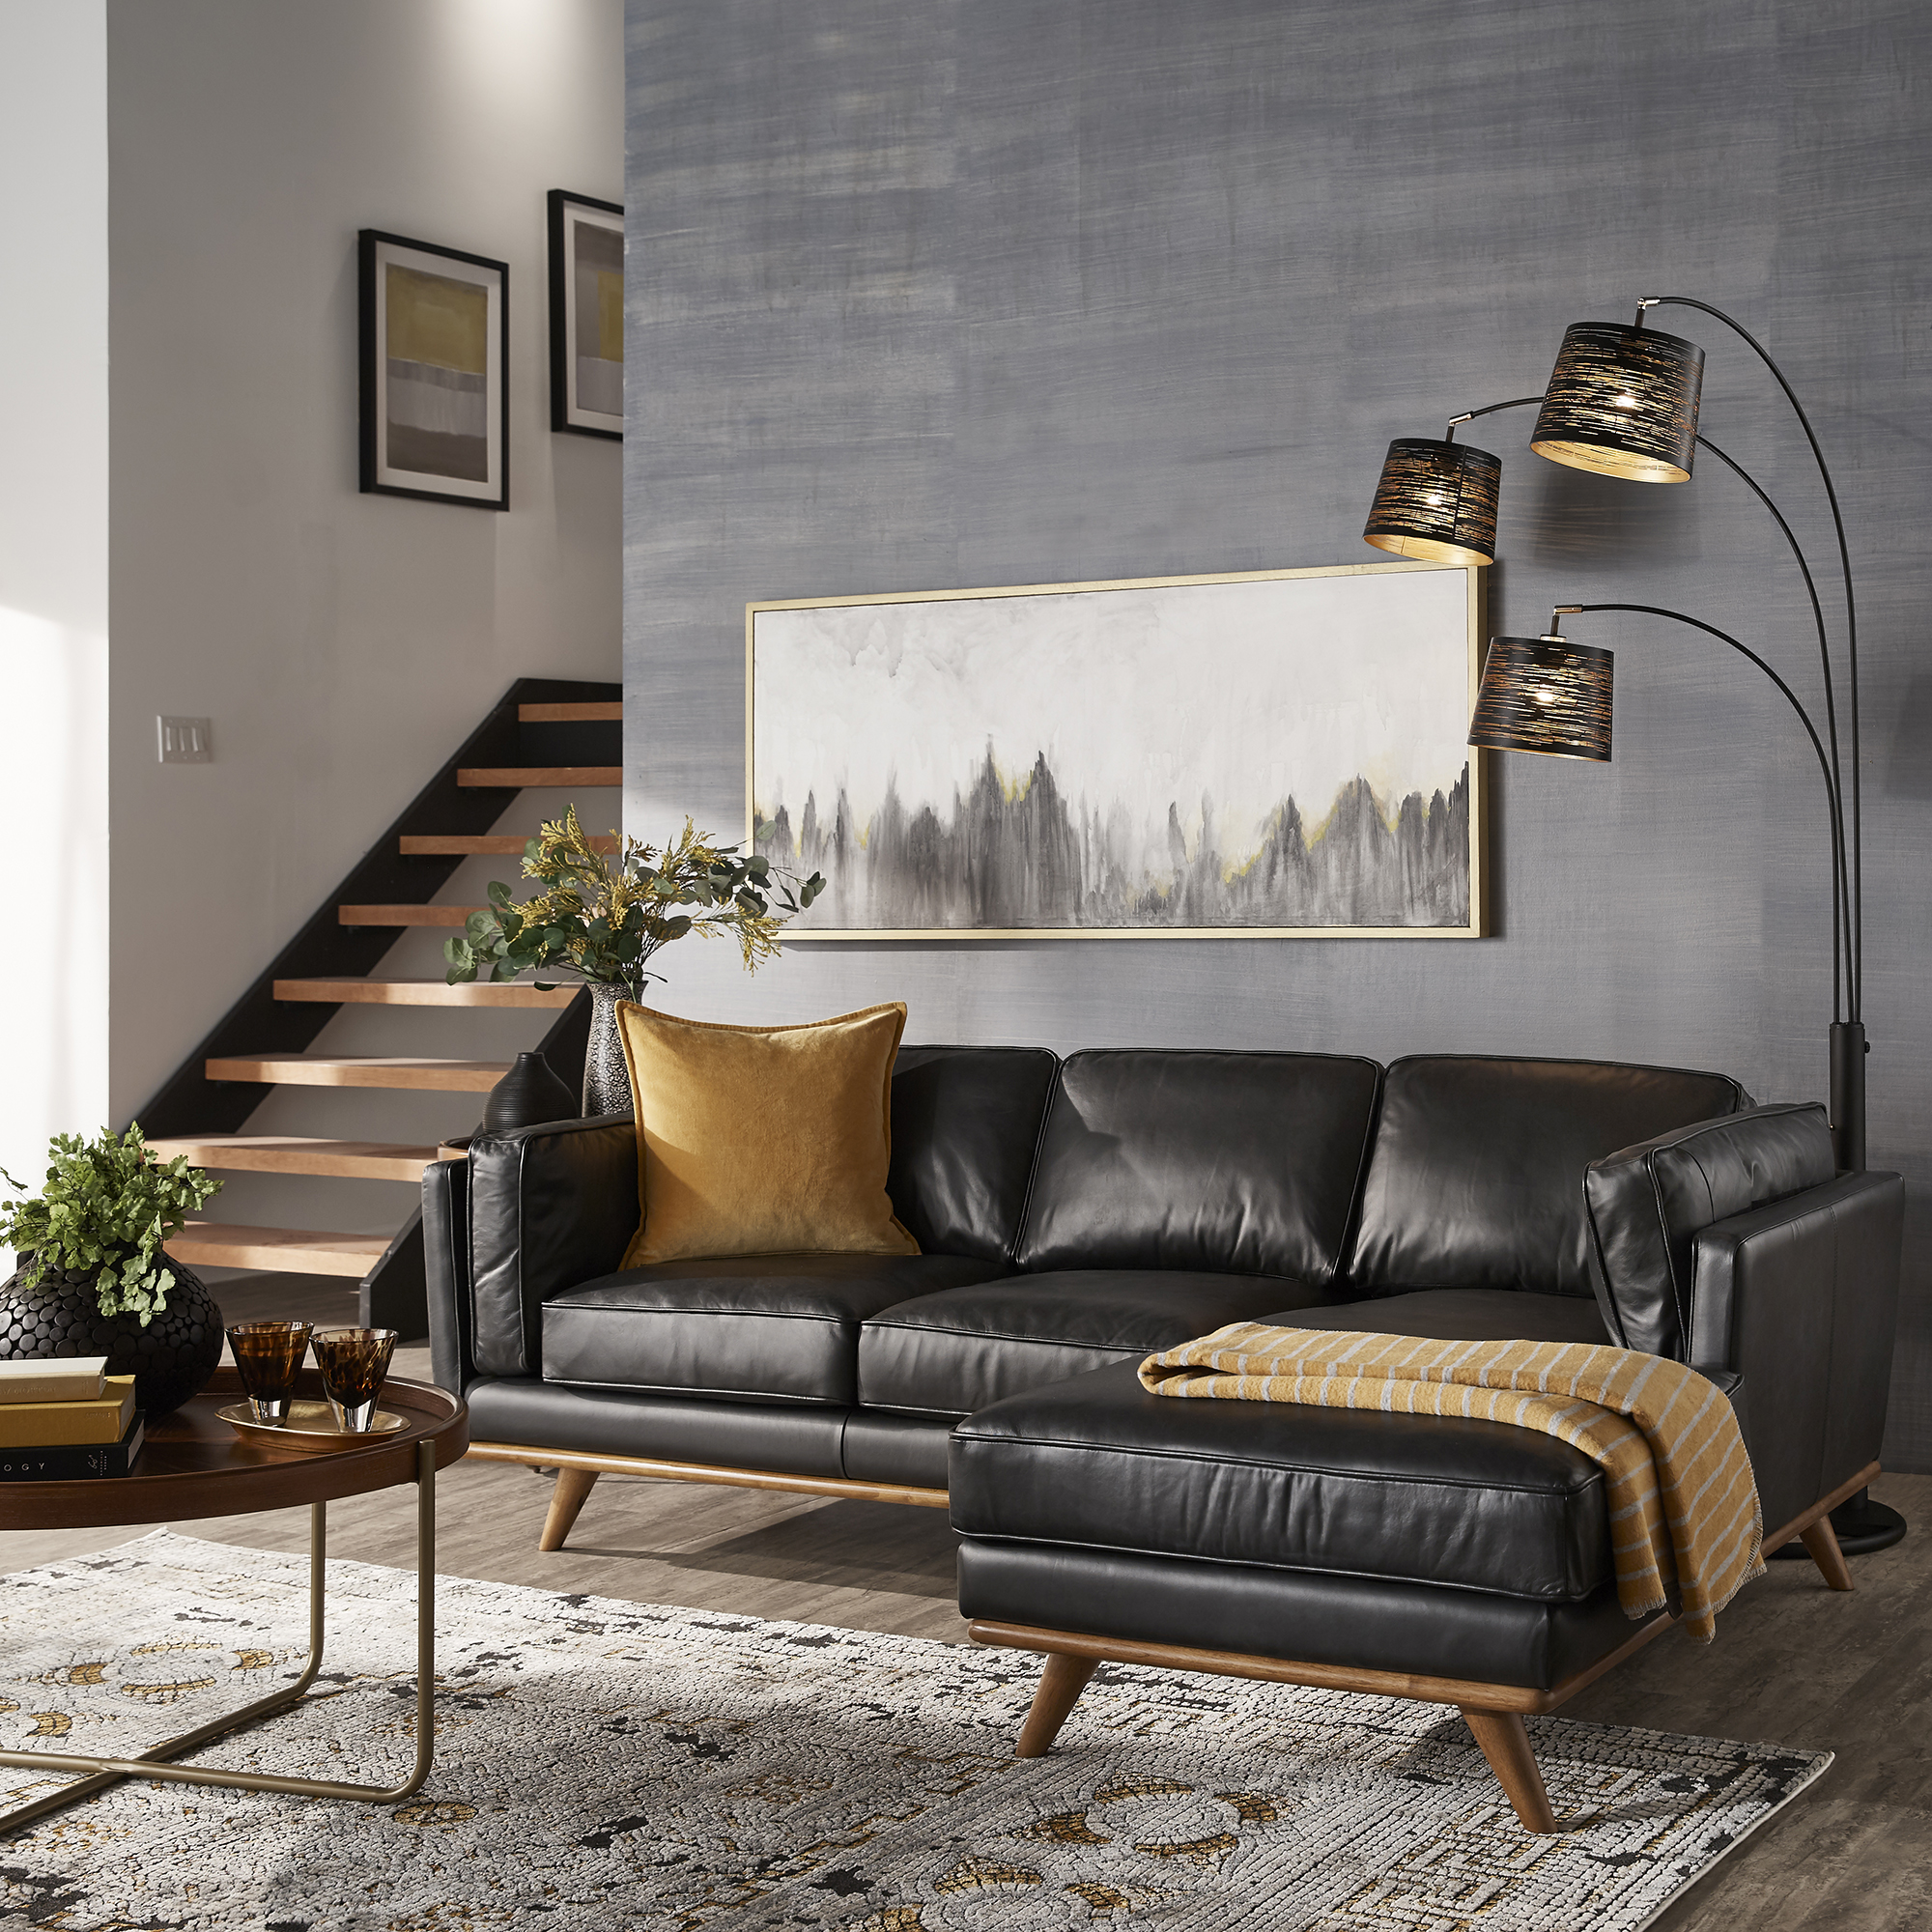 Dark Oak and Black Oxford Leather Sectional Sofa